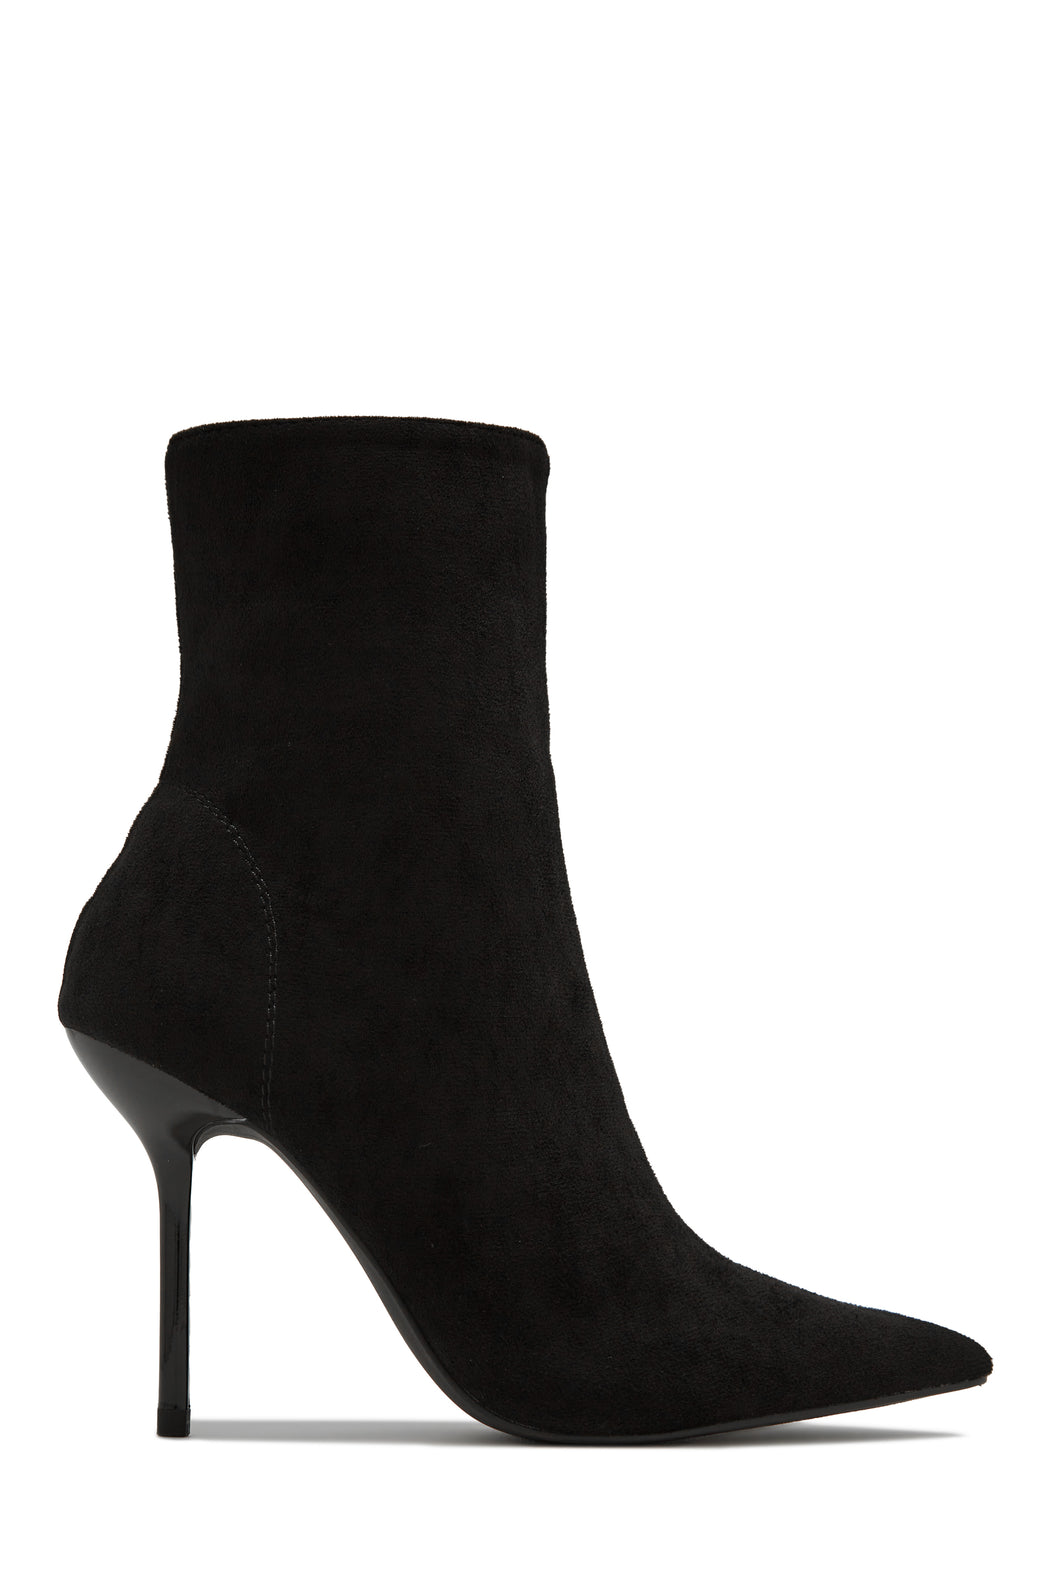 Last Night Pointed Toe High Heel Ankle Boots - Black